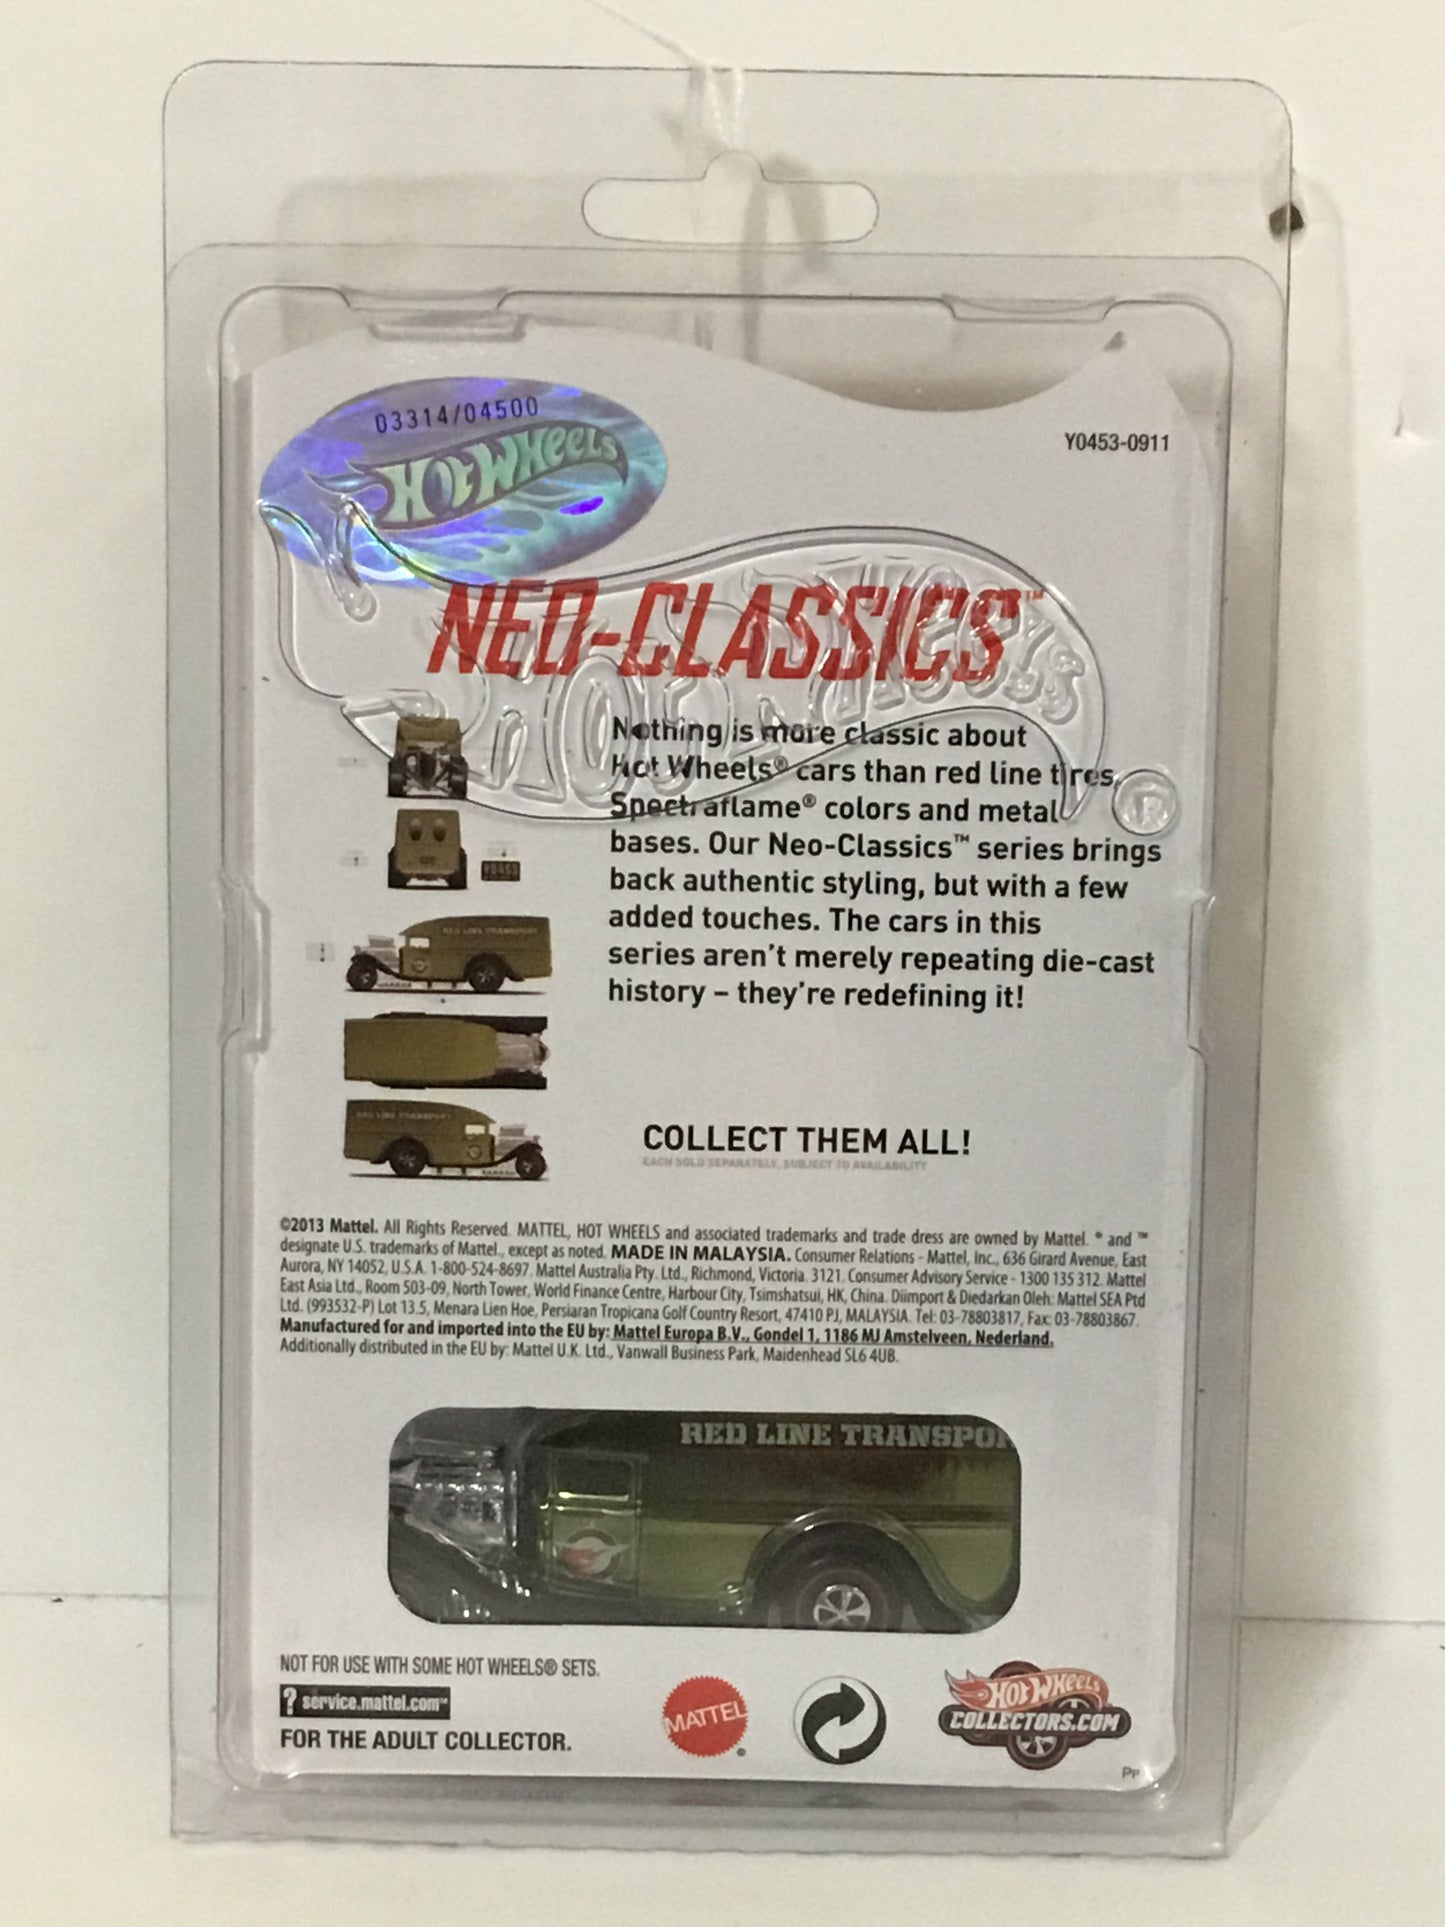 Hot wheels series 12 neo Classics Blown Delivery 3314/4500